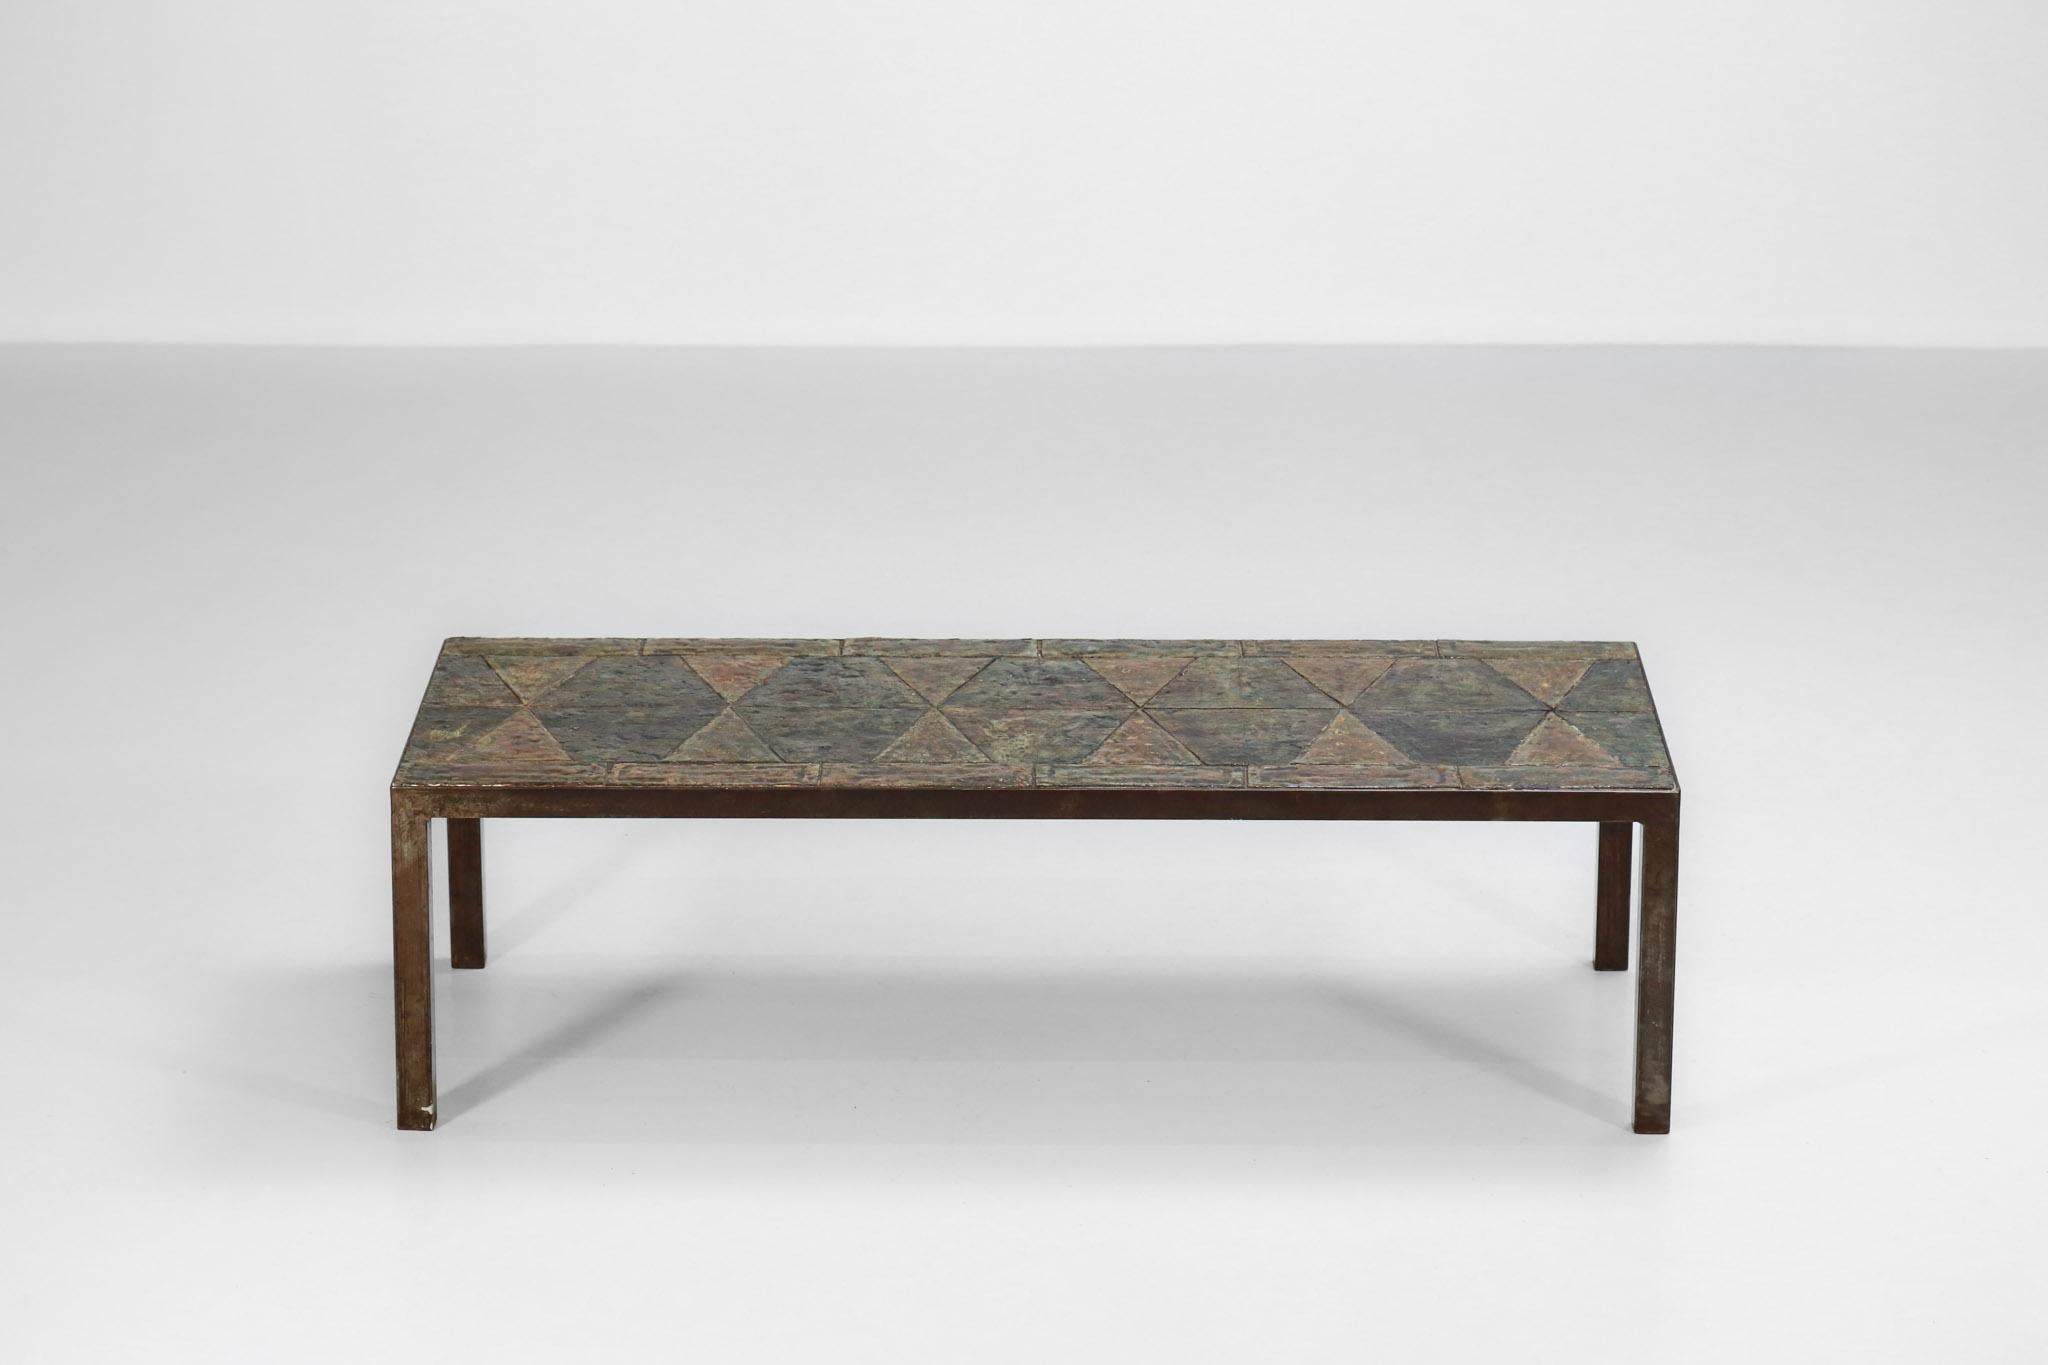 Brutalist Coffee Table from the 1960s Made of Enameled Lava Stones French Design 2